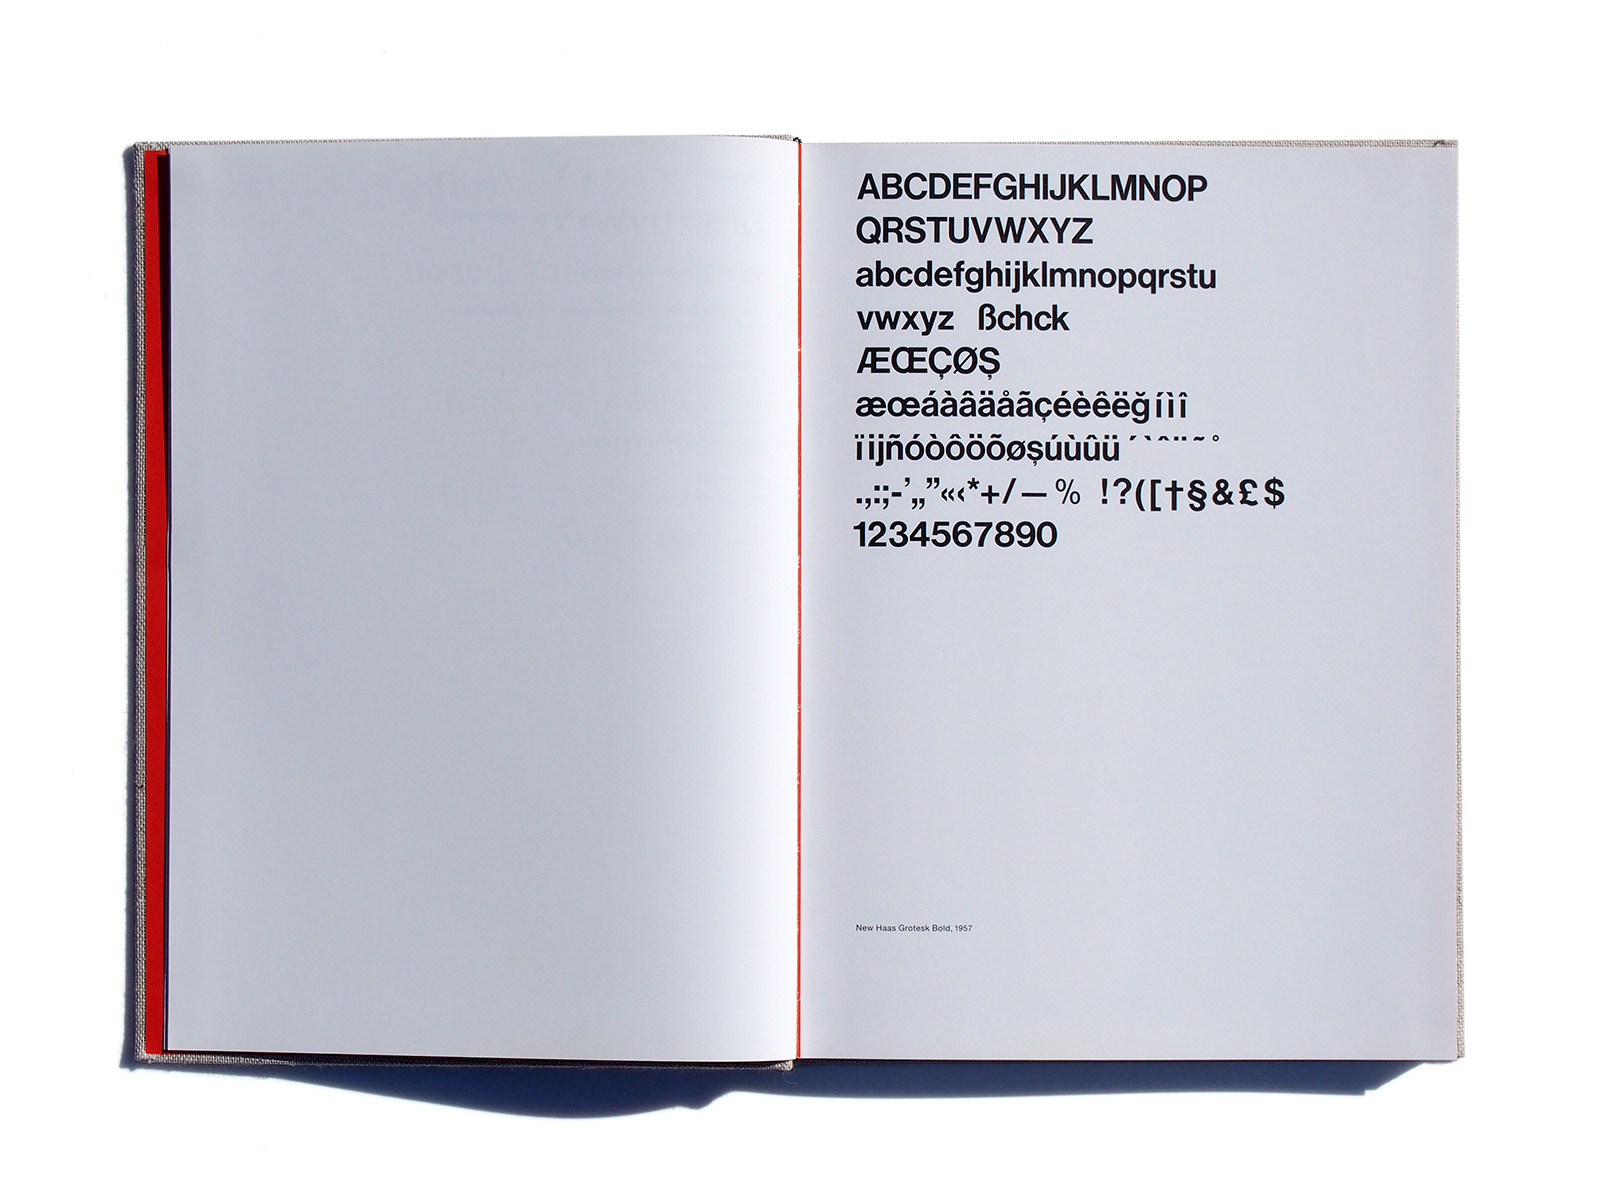 Helvetica Forever: Story of a Typeface brand new | SPREAD